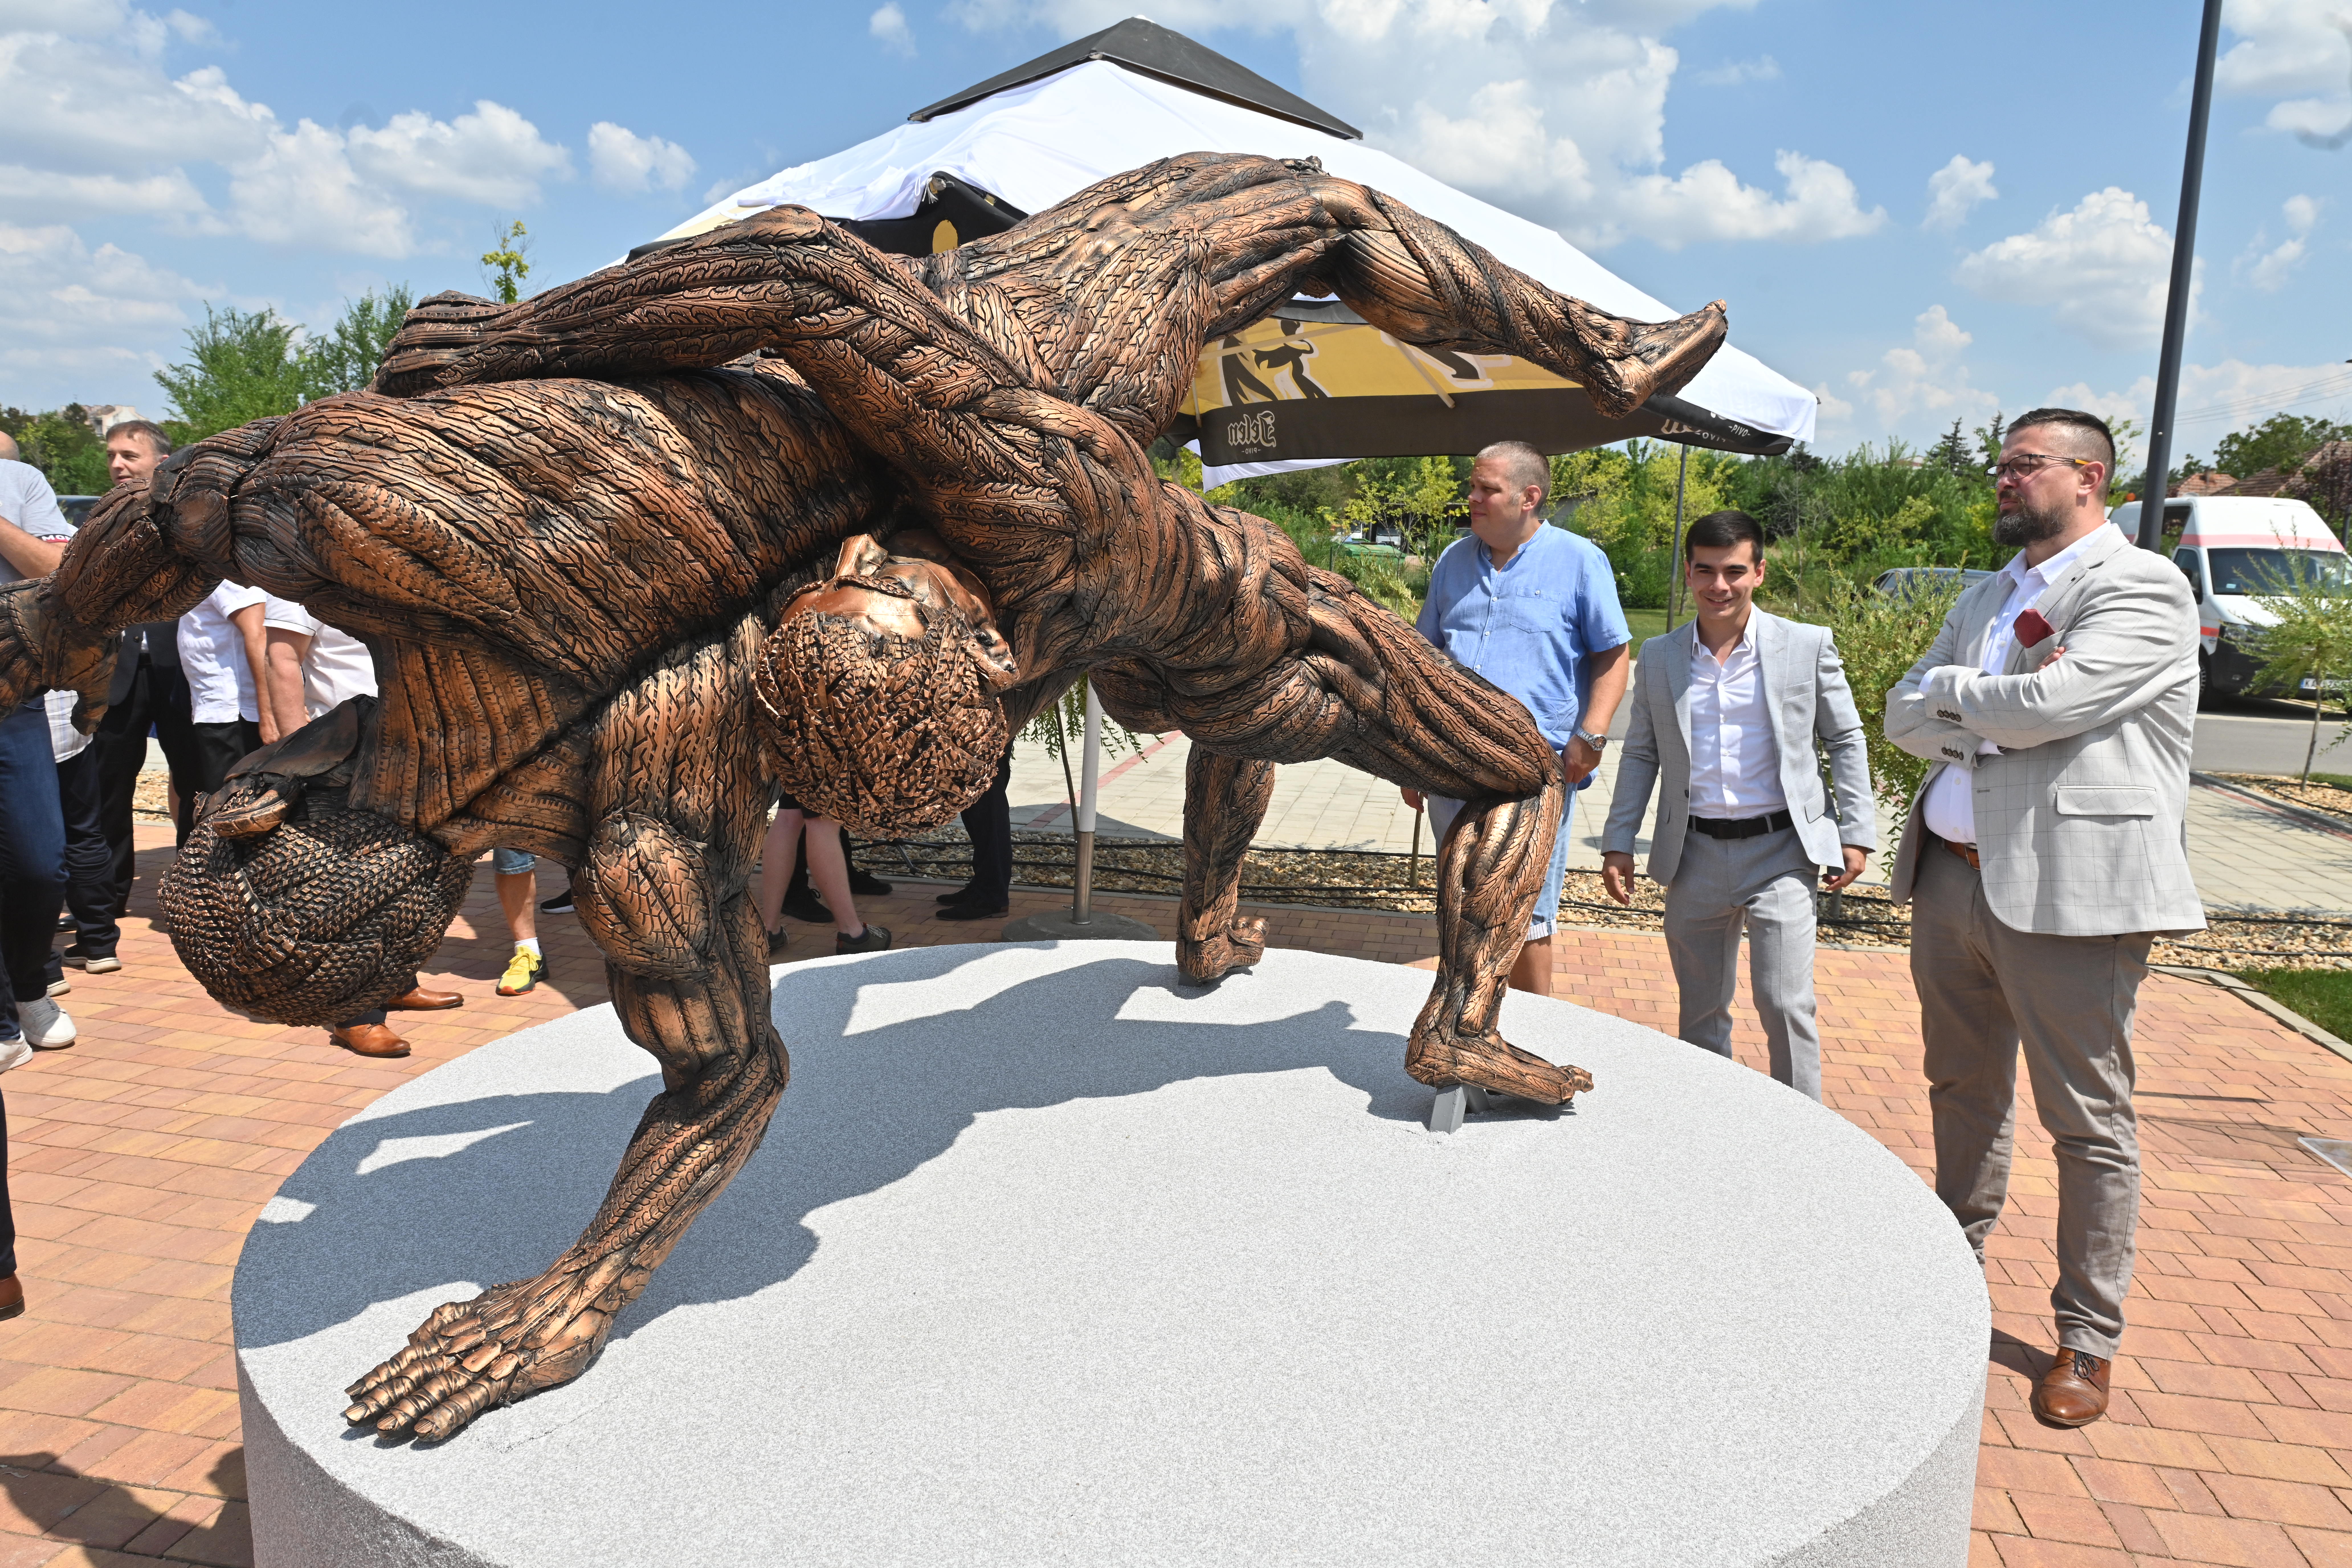 President Juhász attends the unveiling of ”The Wrestler” statue in Kanjiža